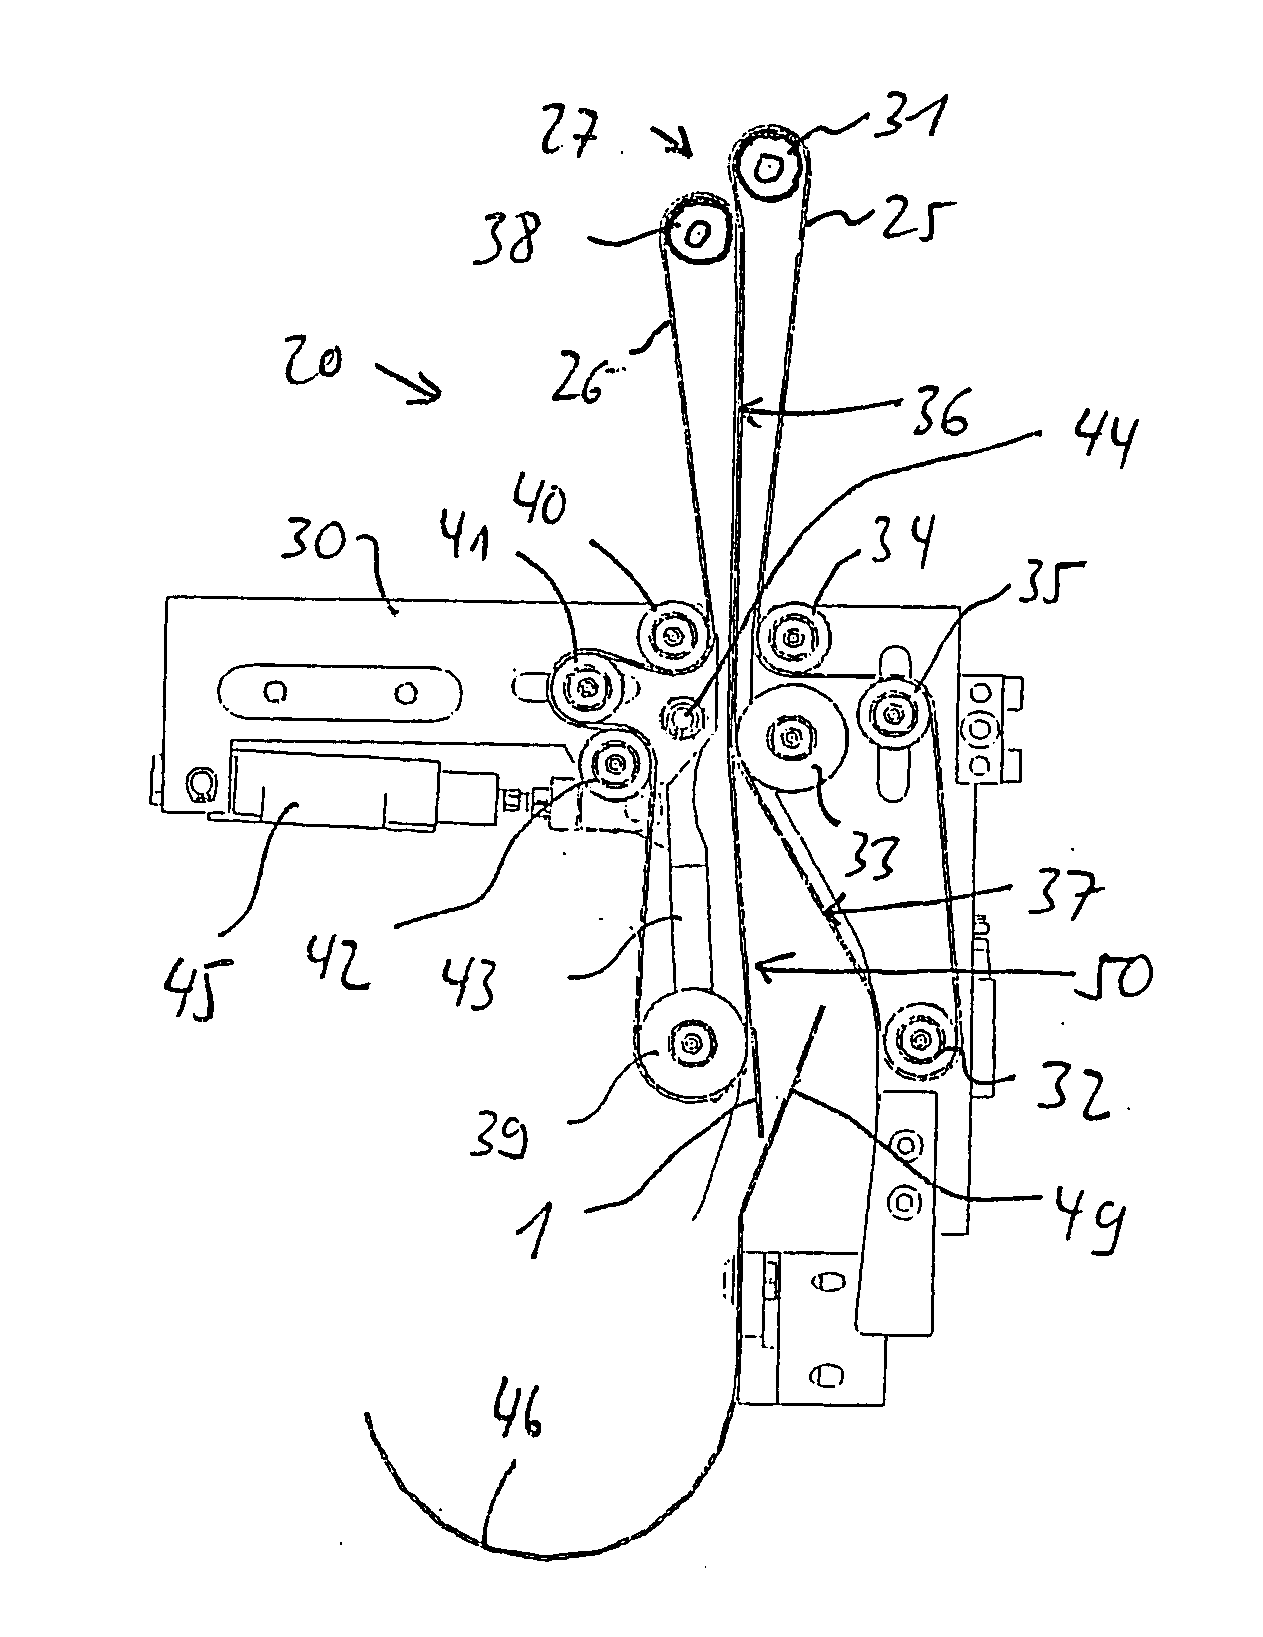 Device for guiding a brochure from a stock-piling device to a brochure conveying device